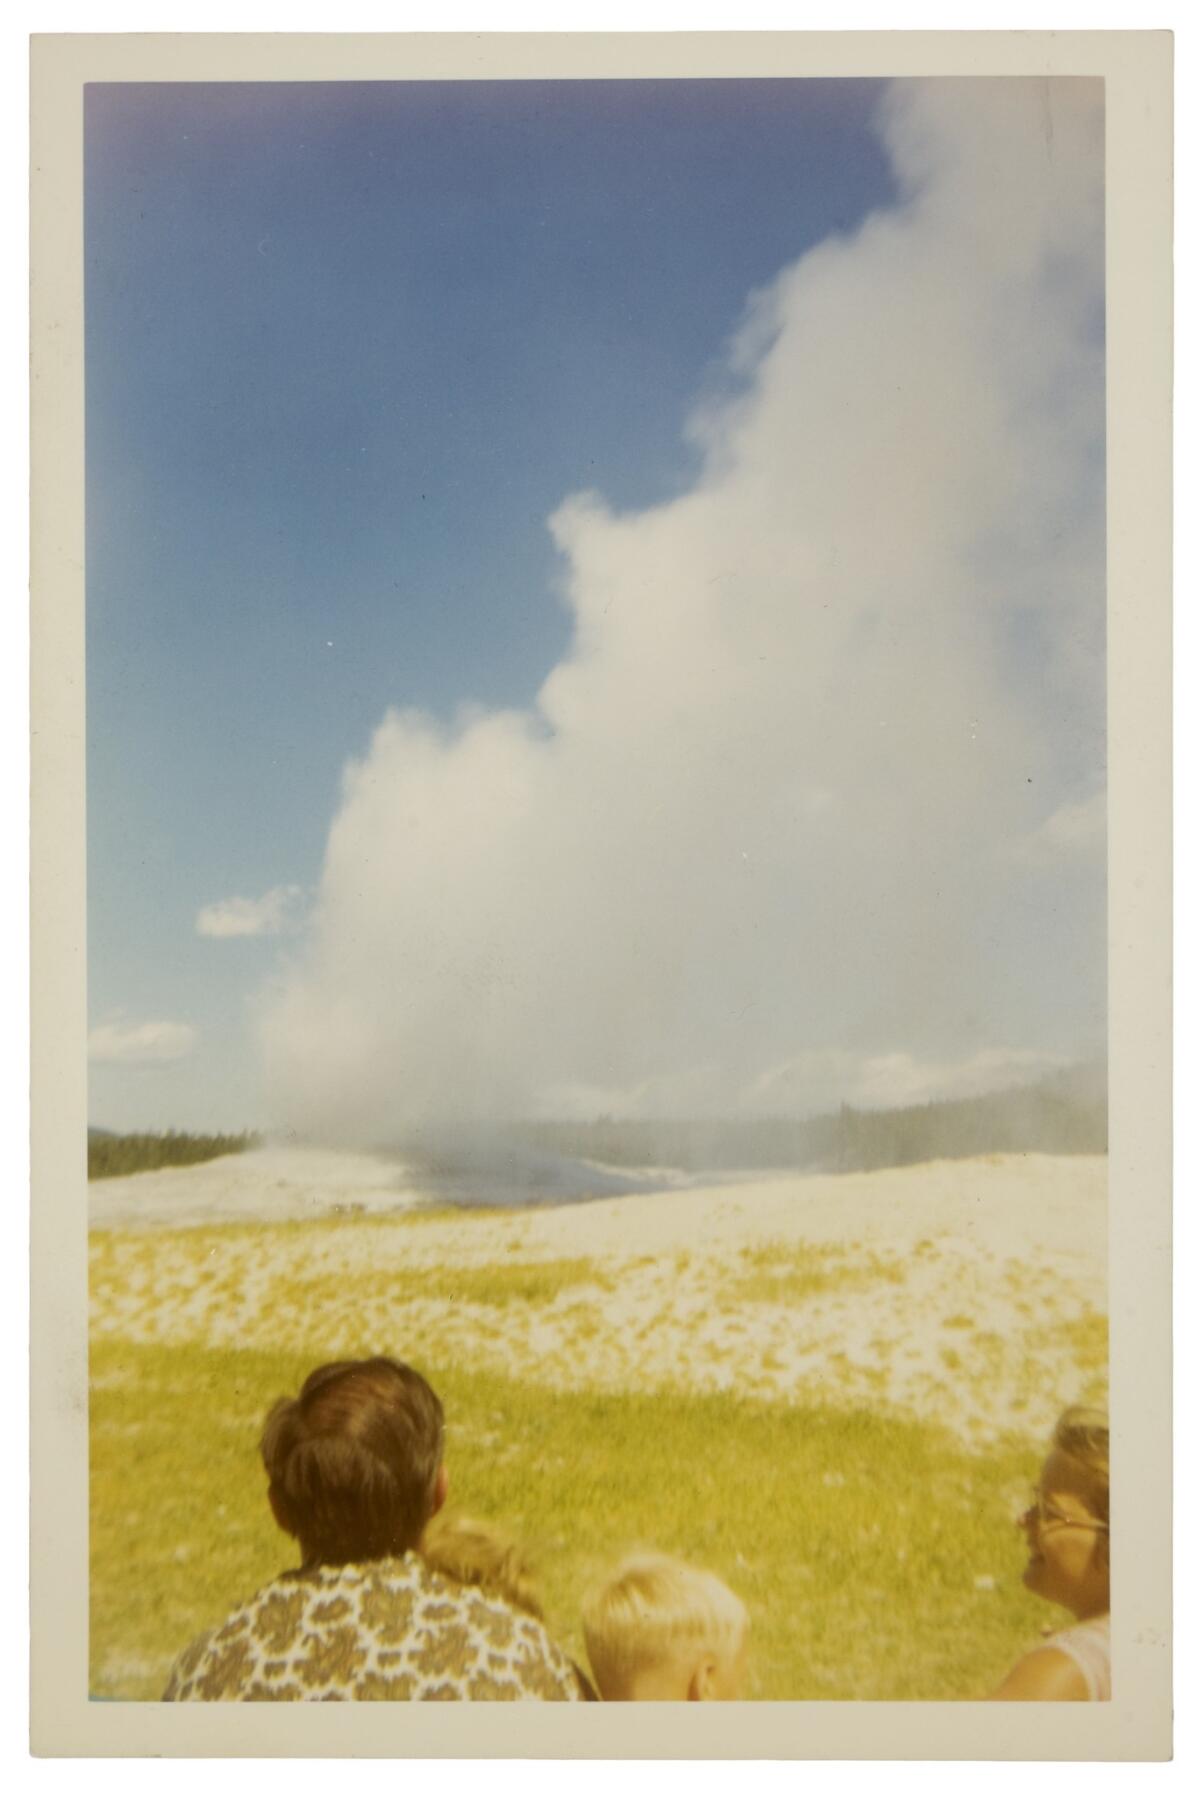 Photographer unknown, Old Faithful Geyser, Yellowstone National Park, August 1968 (Image courtesy of George Eastman Museum, Gift of Peter J. Cohen)